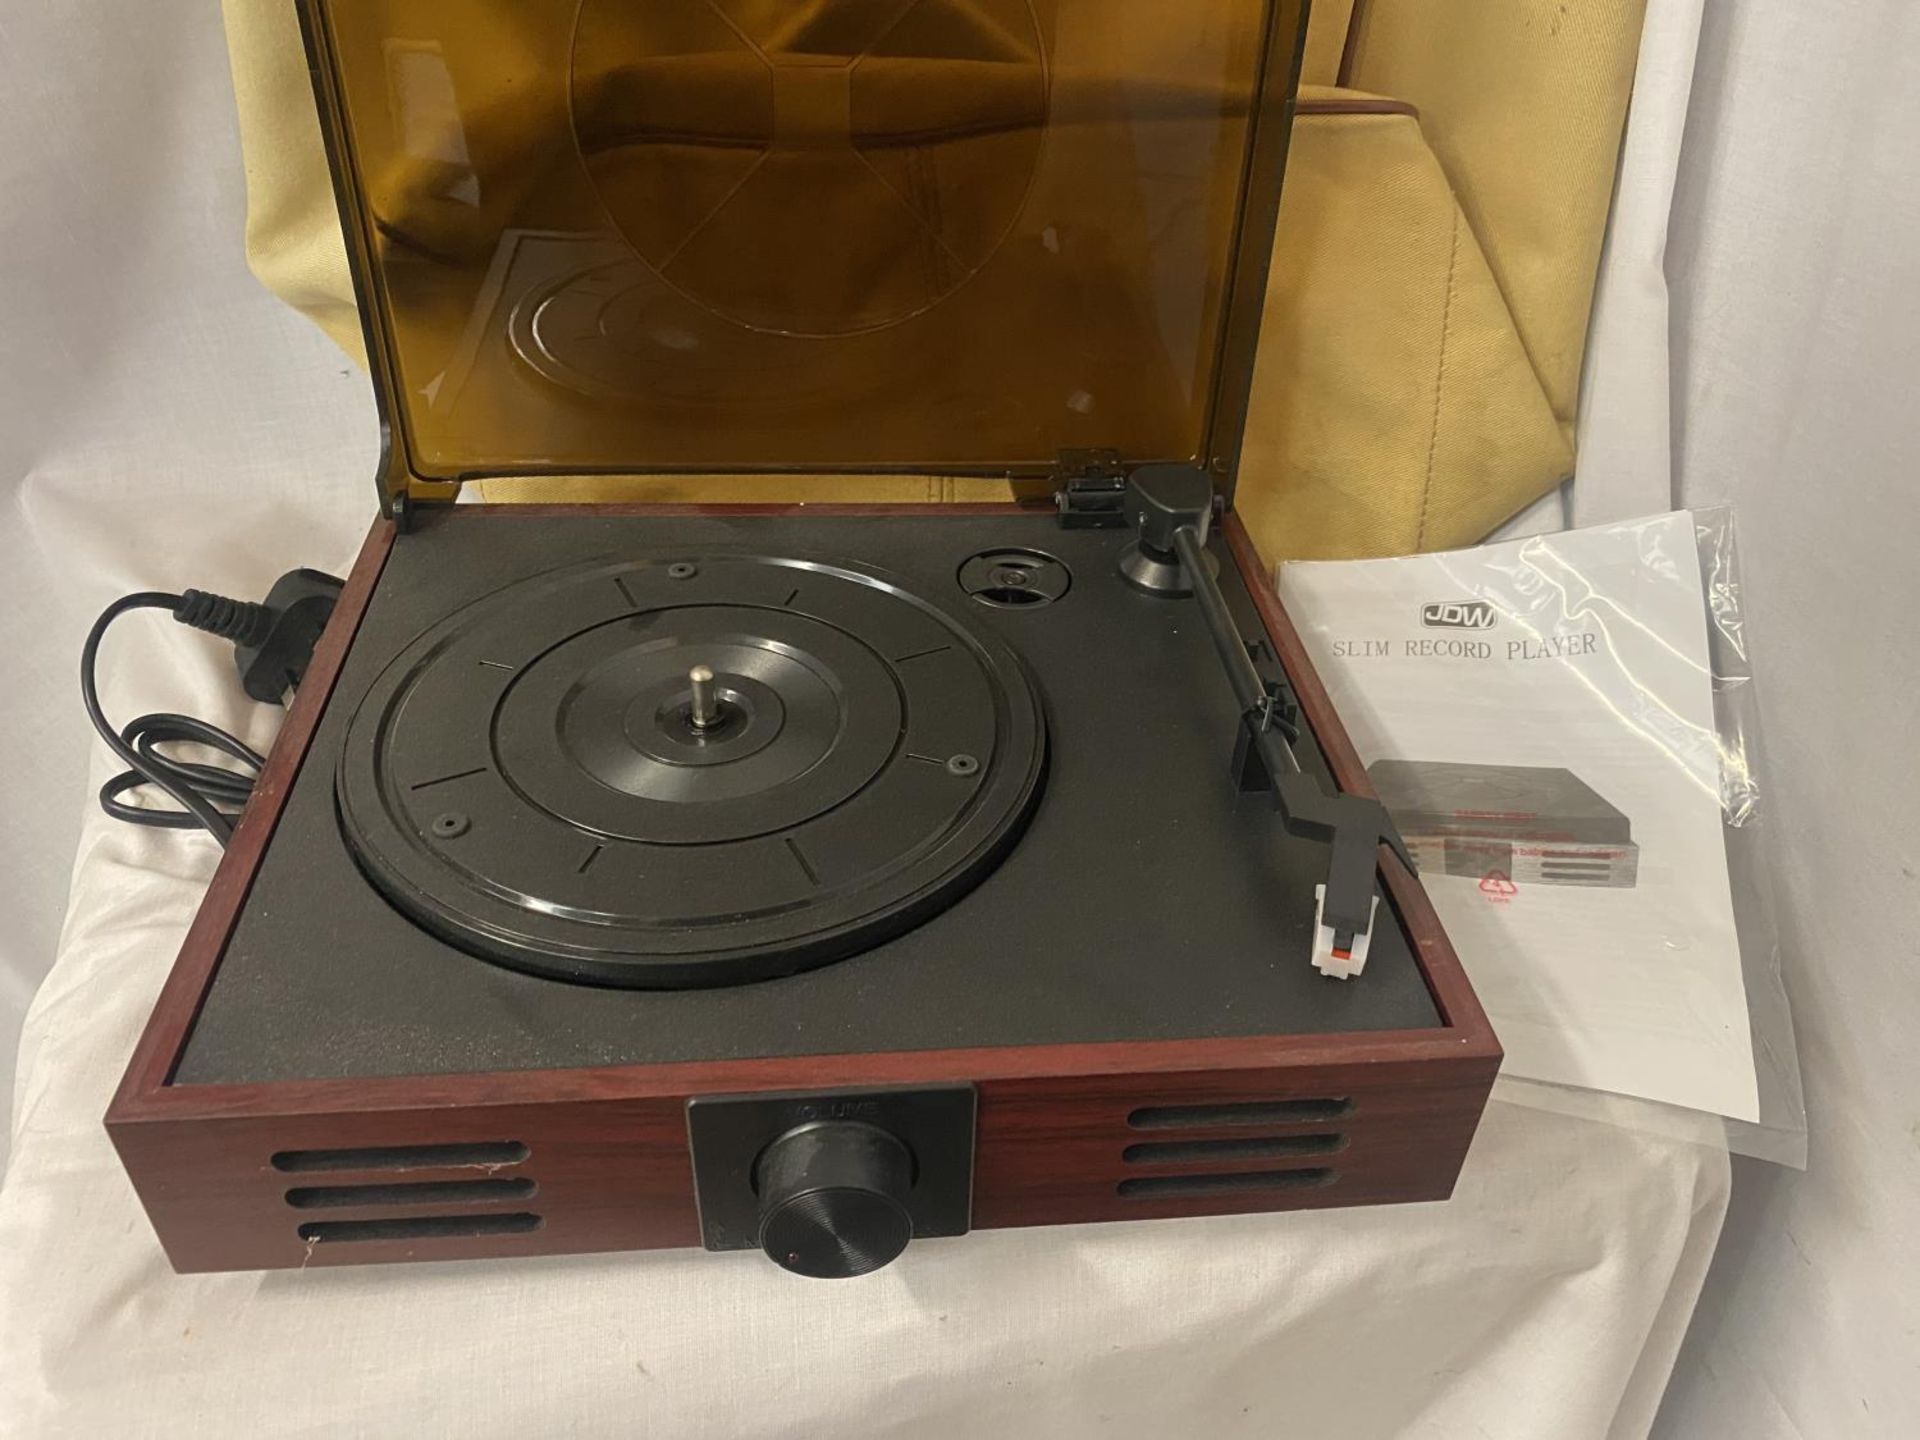 A JDW RECORD PLAYER - Image 5 of 6